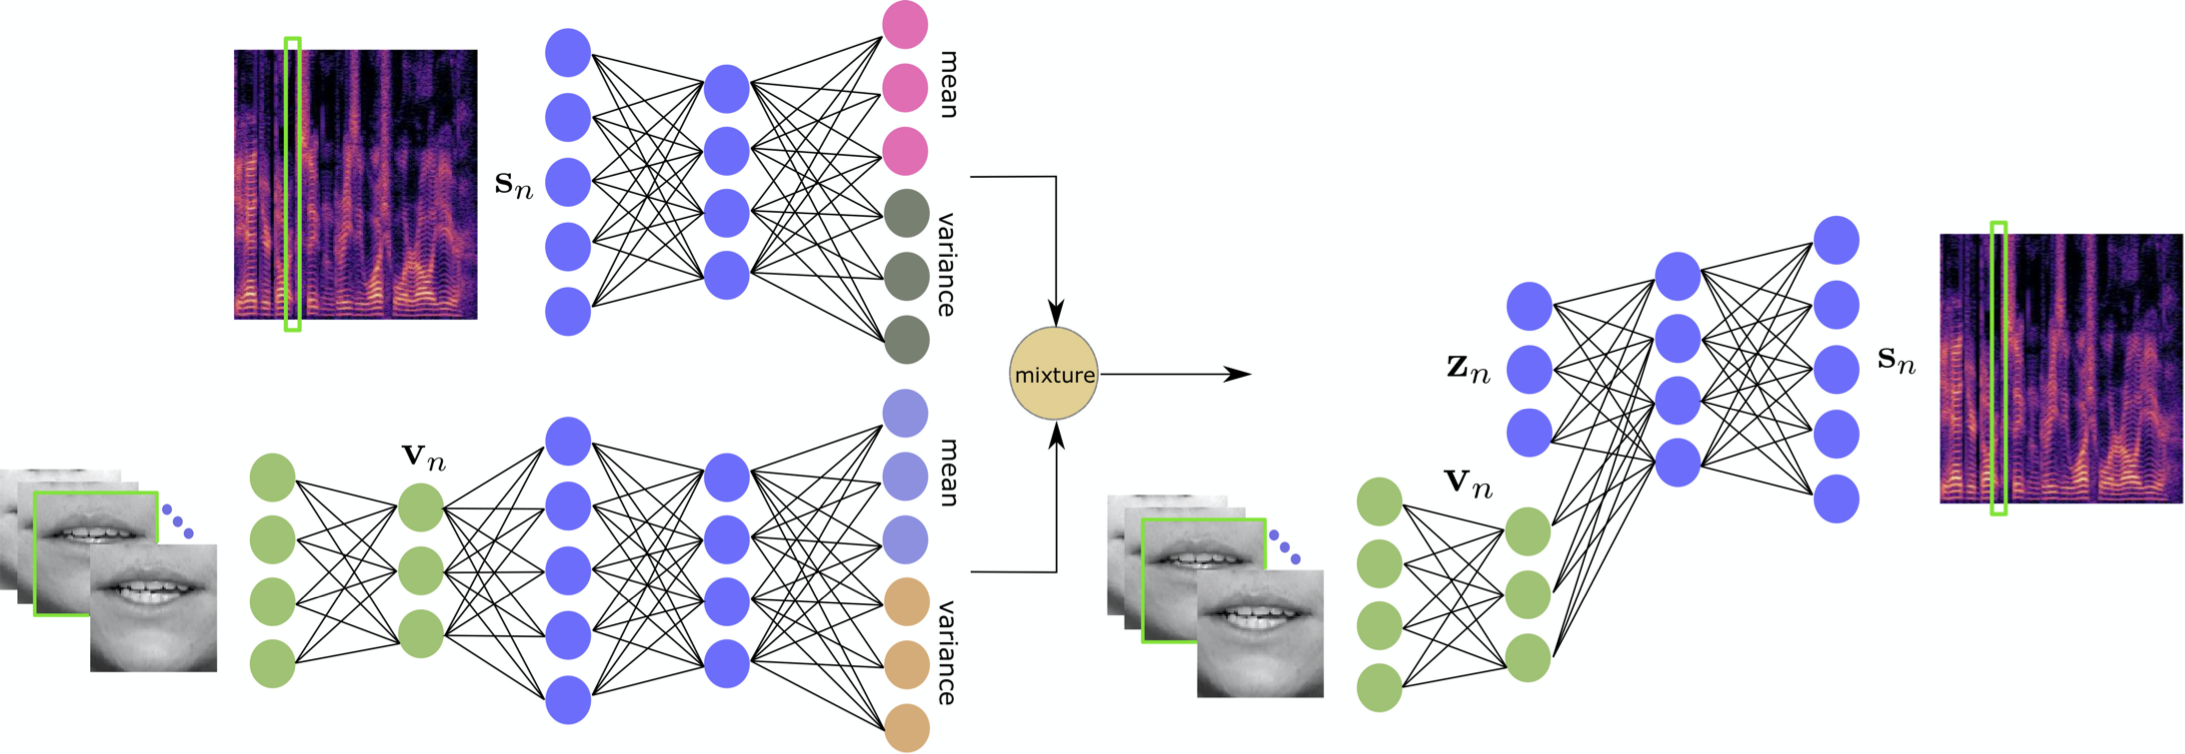 Architecture of the proposed mixture of inference networks VAE (MIN-VAE). A mixture of an audio- and a visual-based encoder is used to approximate the intractable posterior distribution of the latent variables.